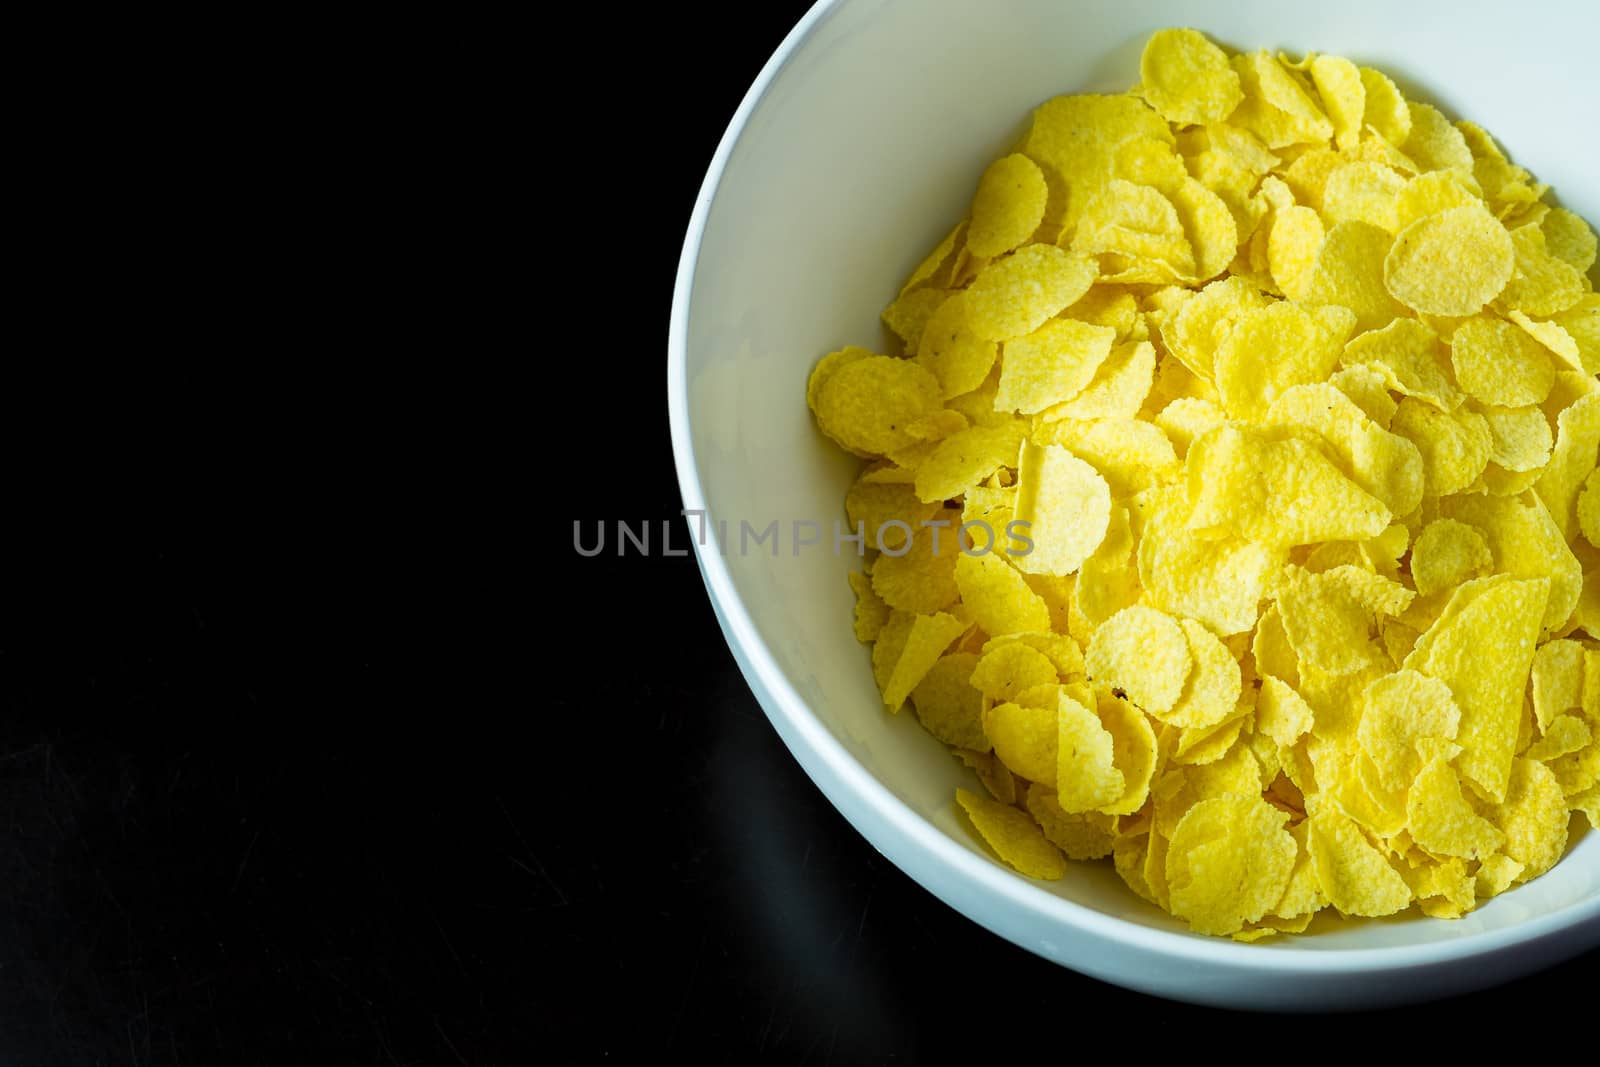 cornflakes in bowl on black table in morning